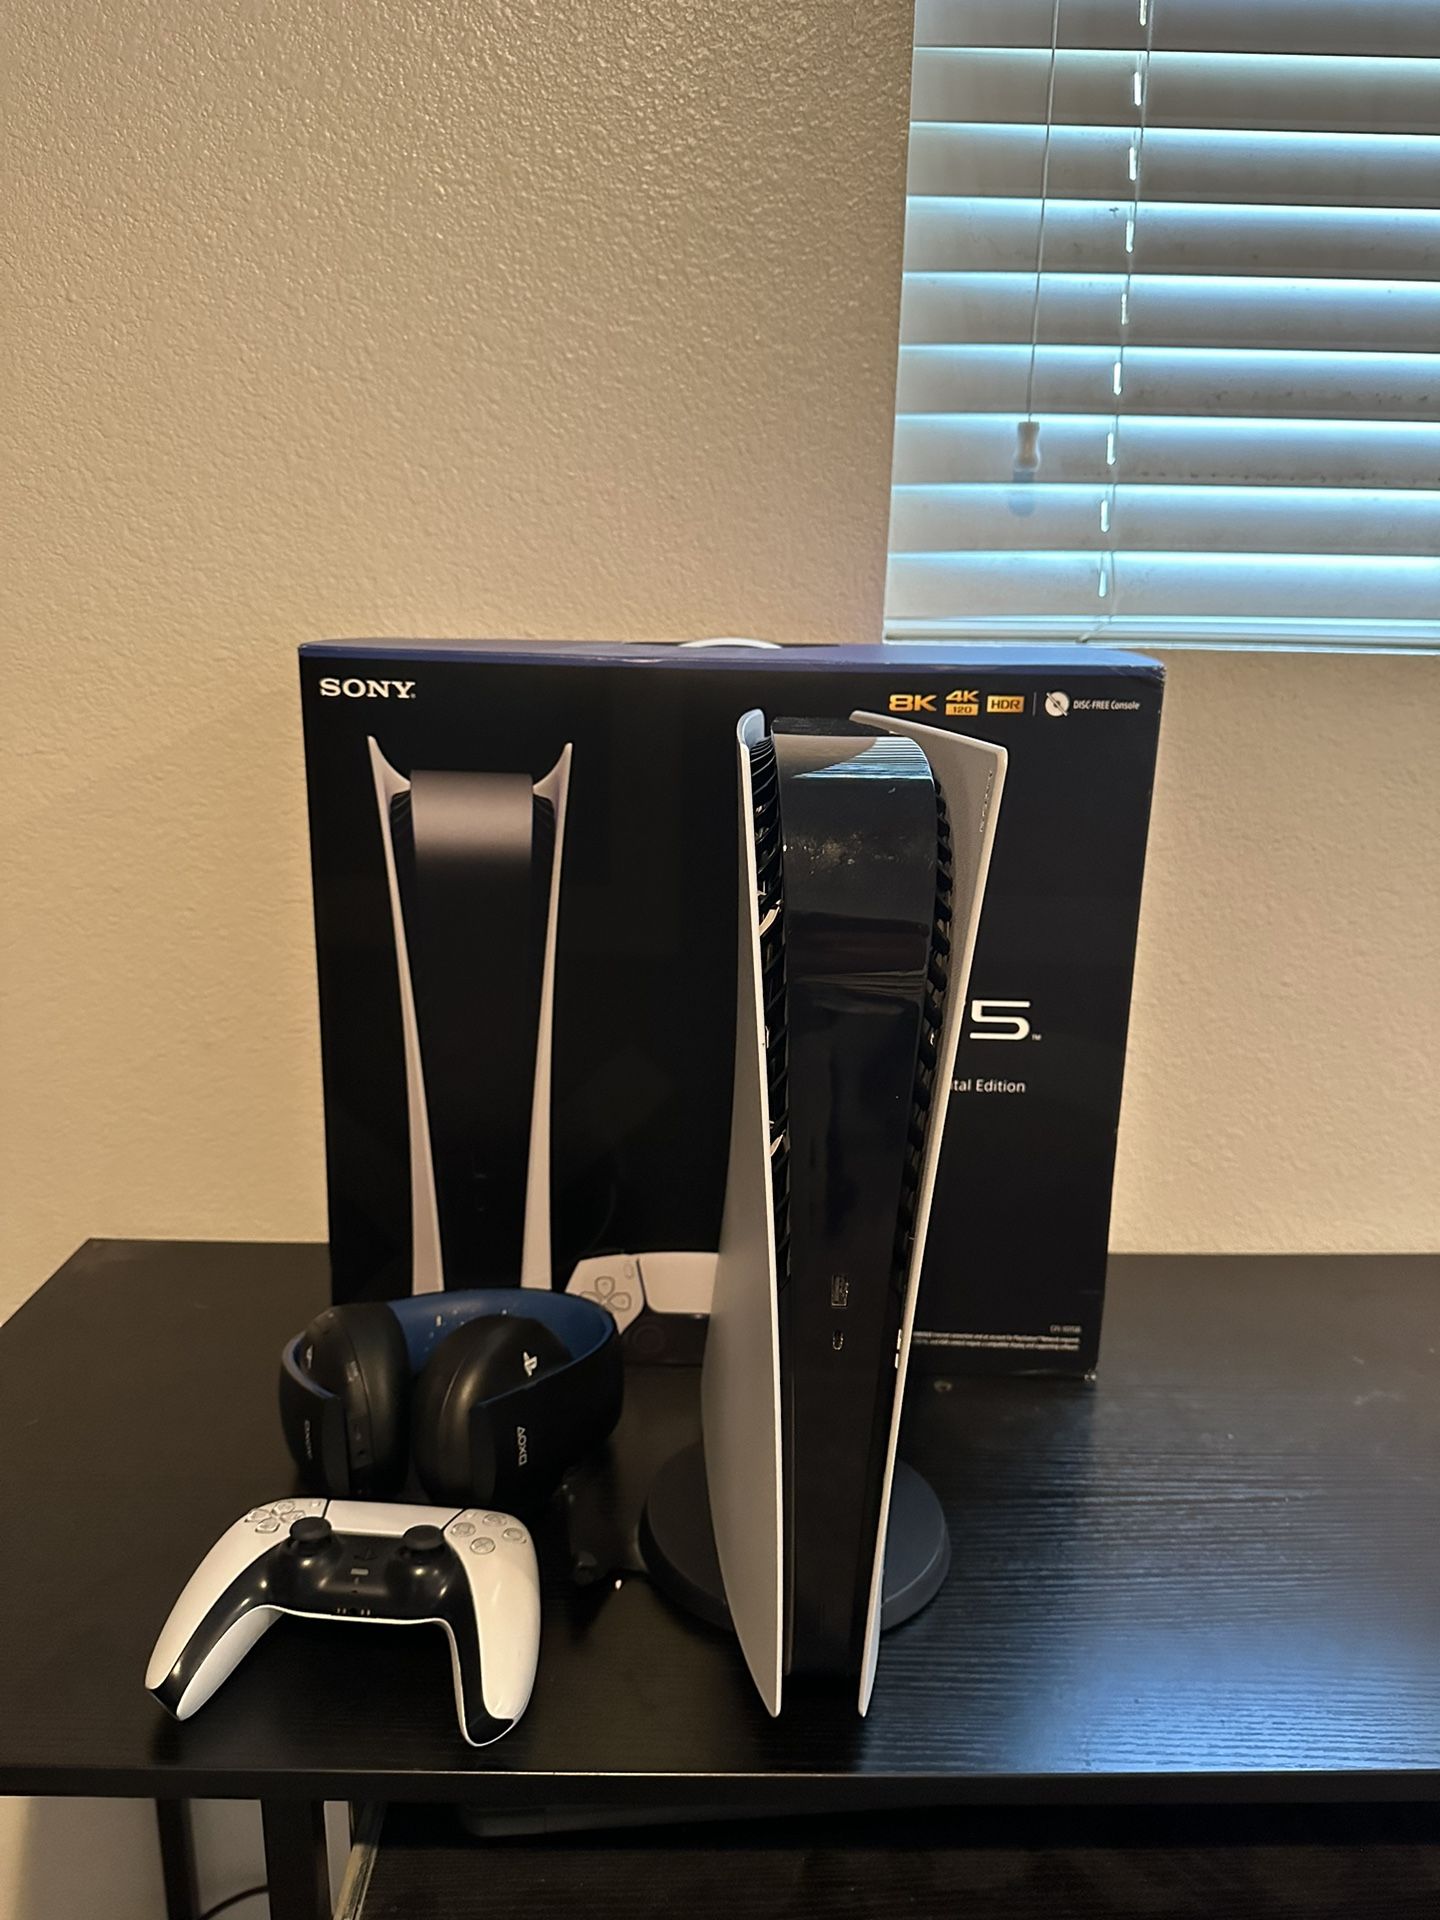 PS5 with Wireless headset